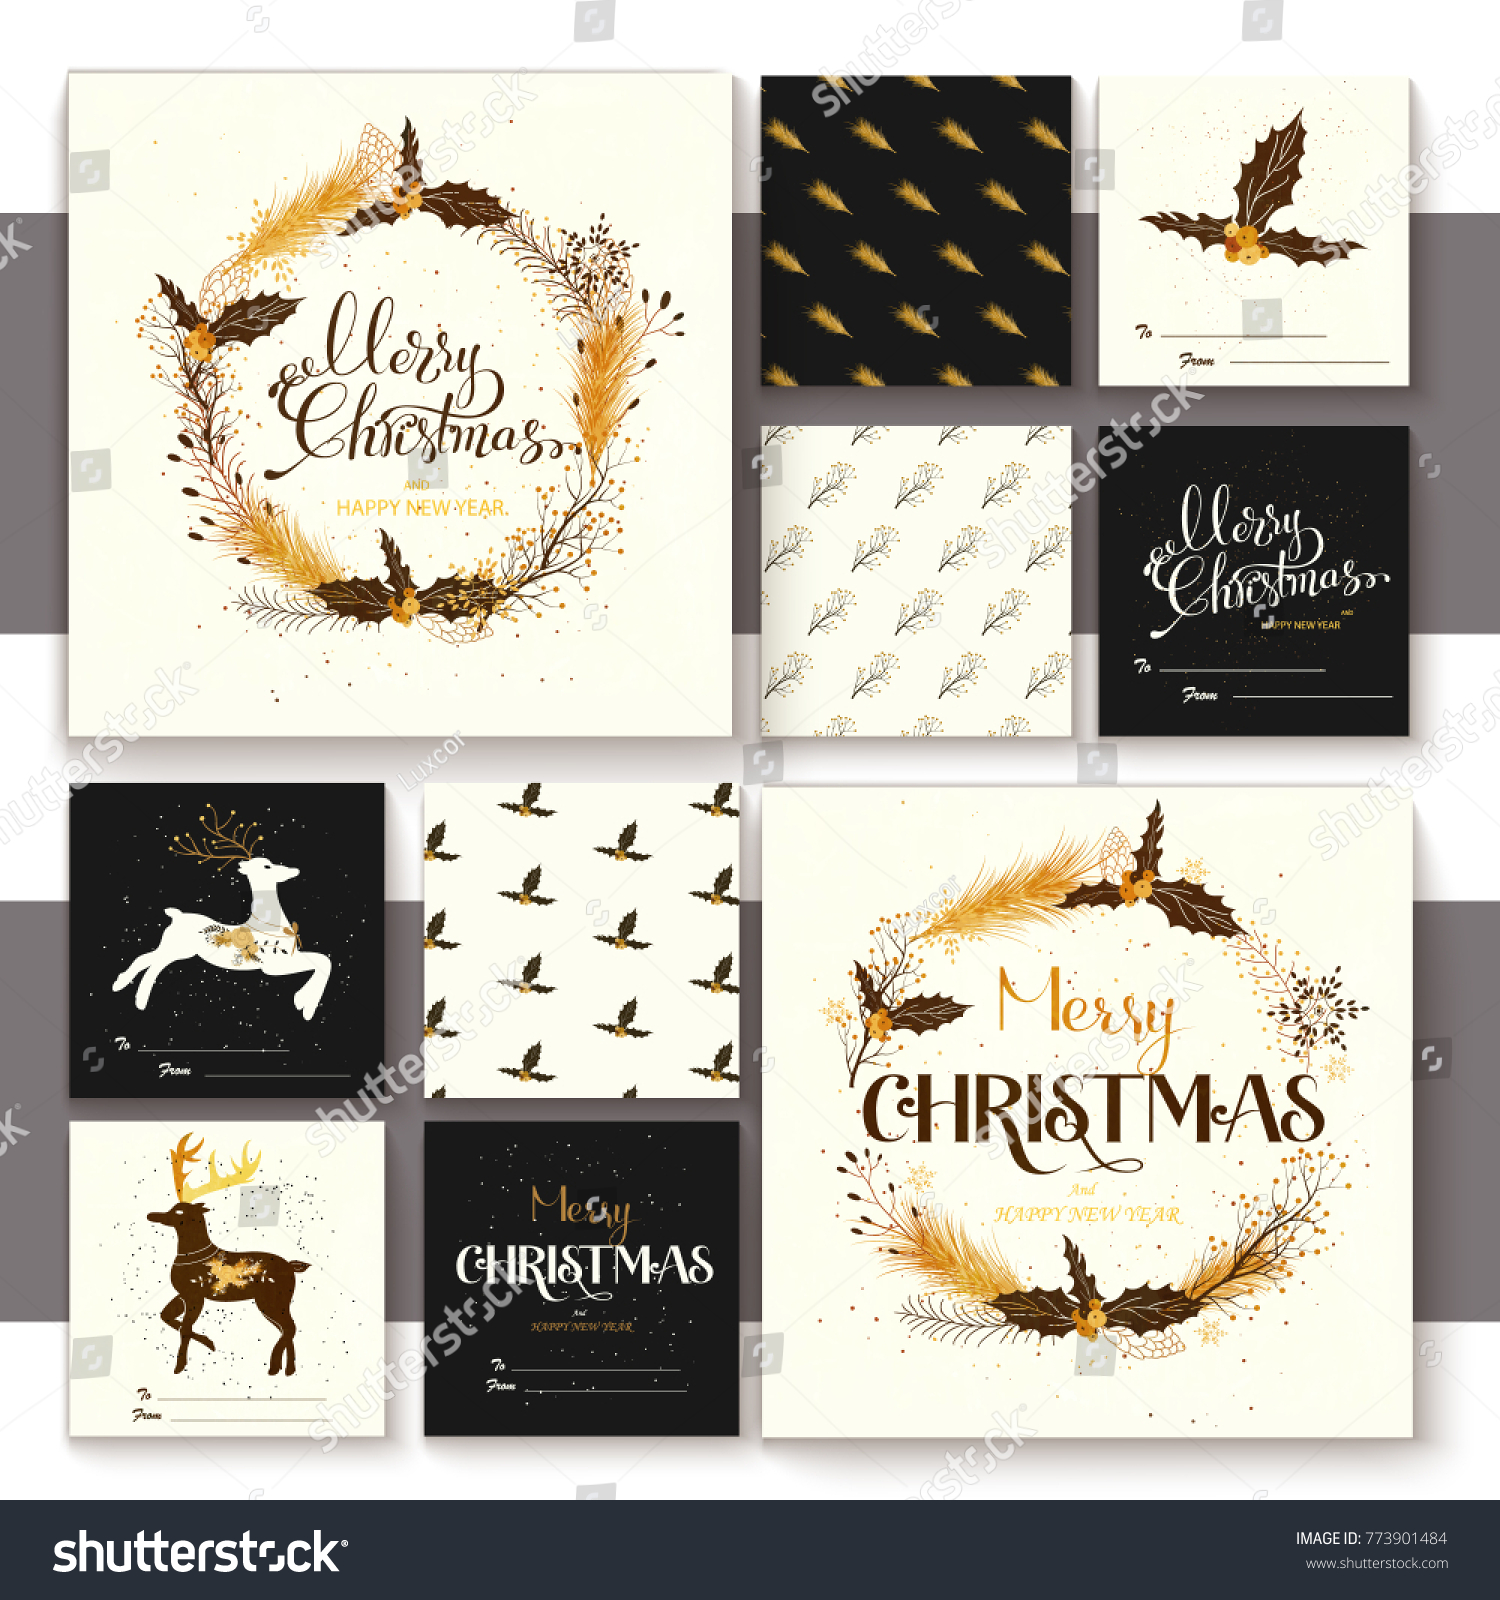 Set of merry christmas elements with lettering, seamless pattern and illustration. Retro golden stile. #773901484